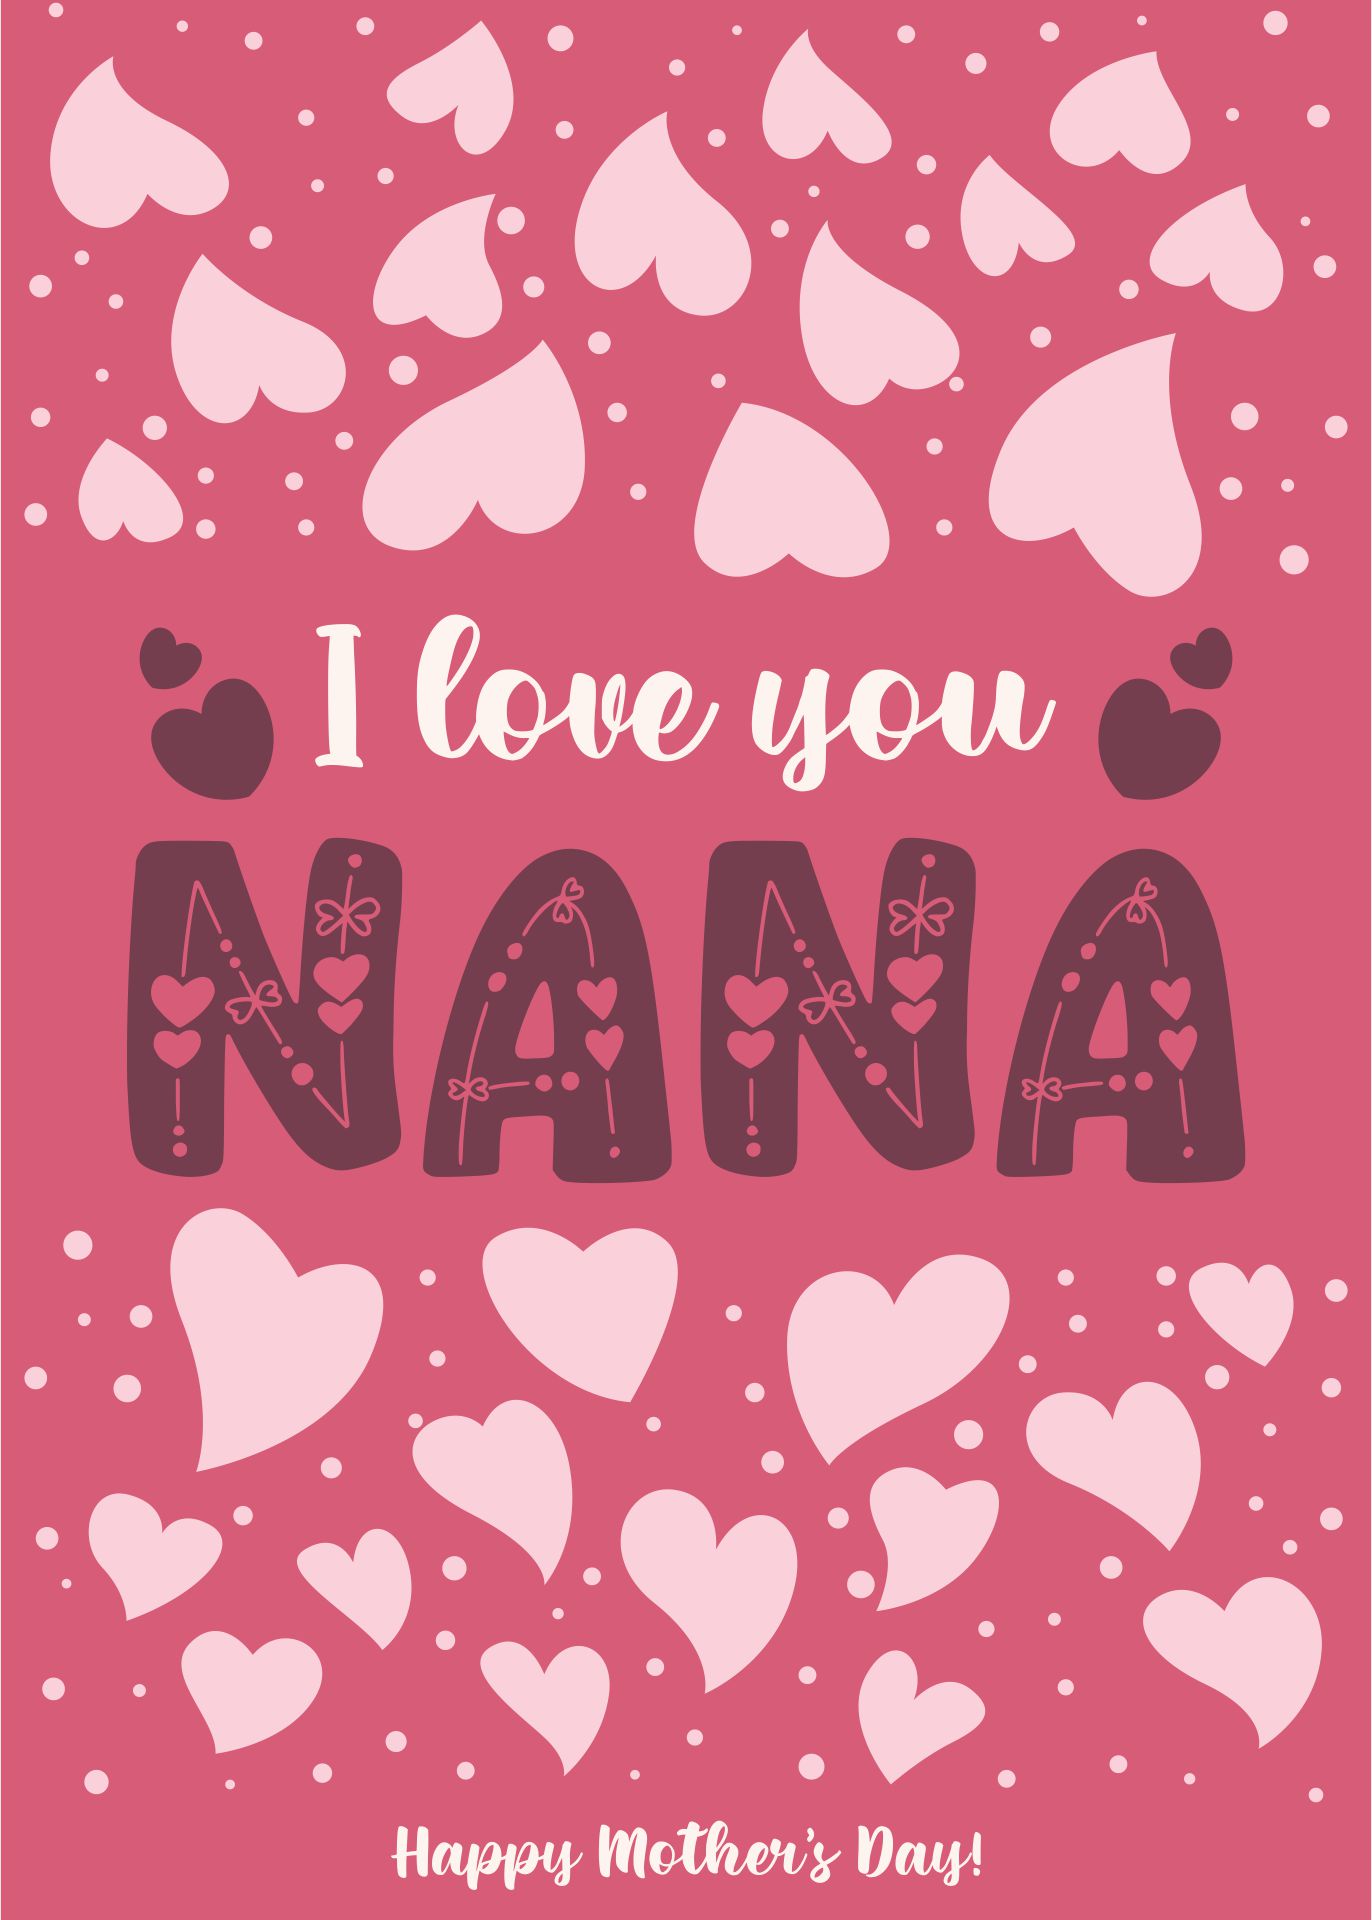 7 Best Images Of Mother s Day Nana Printable Cards American Greetings